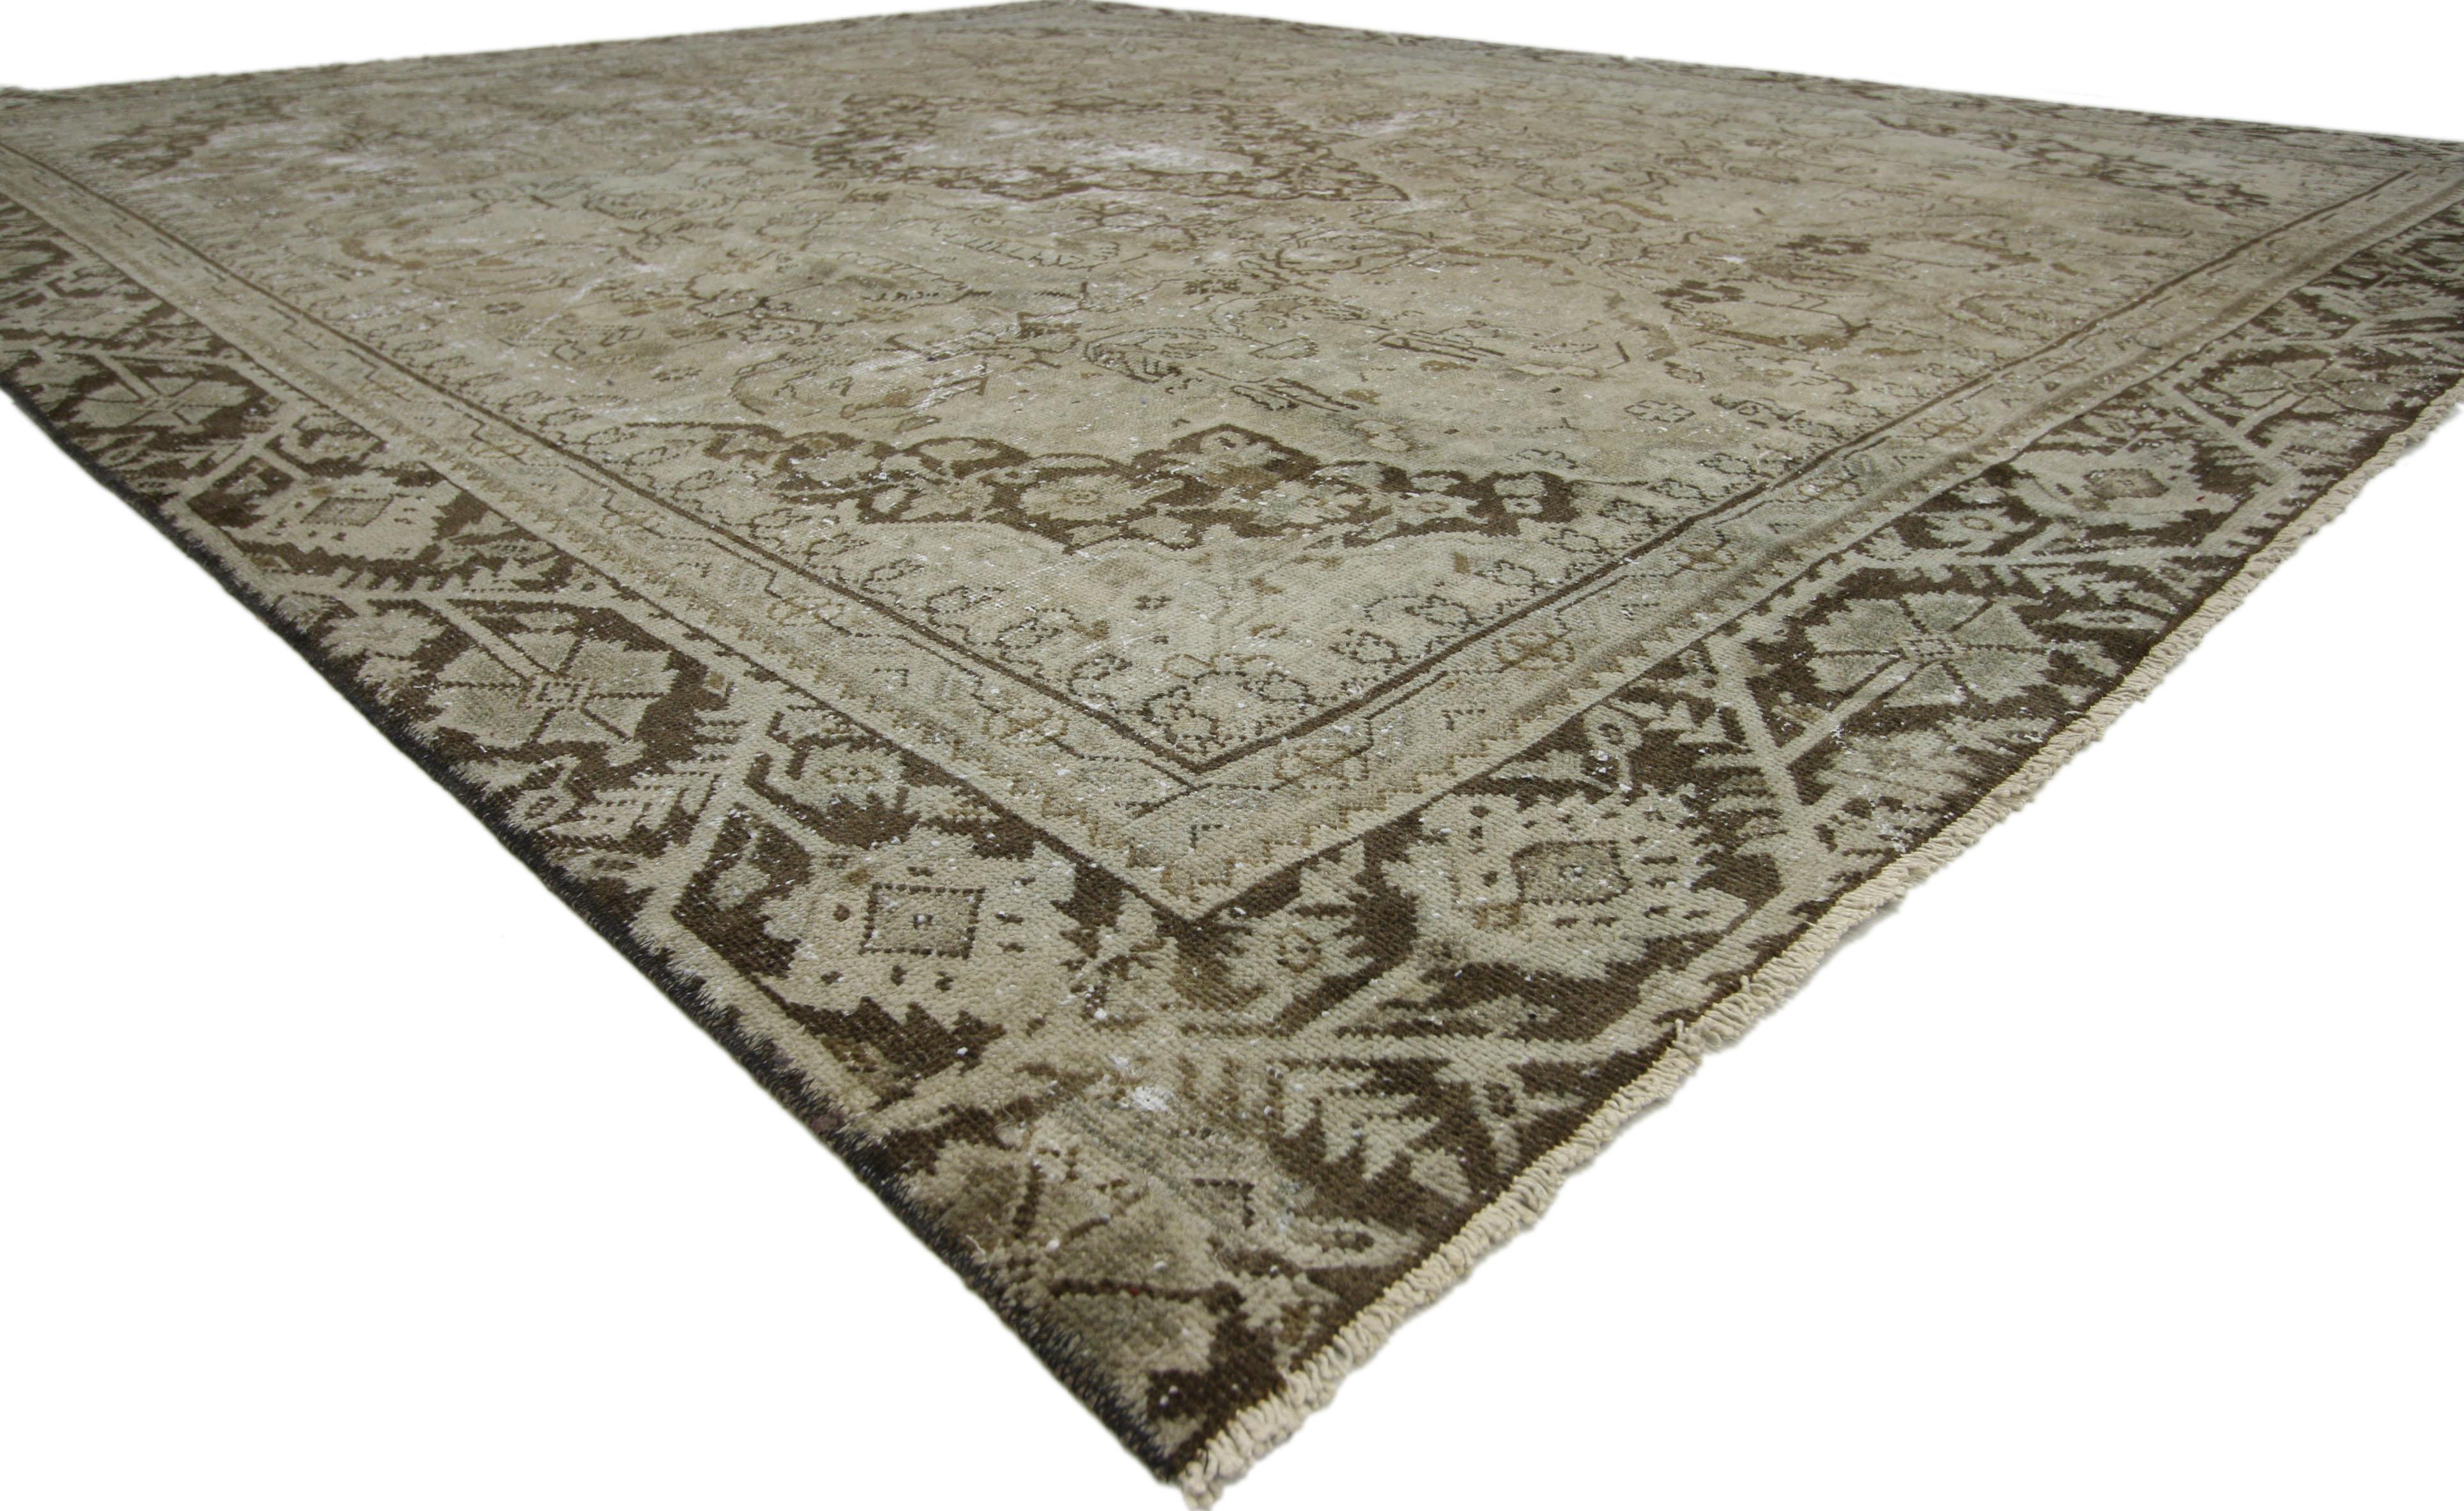 60666 Distressed Antique Persian Mahal Rug with Traditional English Rustic Style 10'00 x 12'03. With its perfectly worn-in charm and rustic sensibility, this hand-knotted wool distressed antique Persian Mahal rug will take on a curated lived-in look